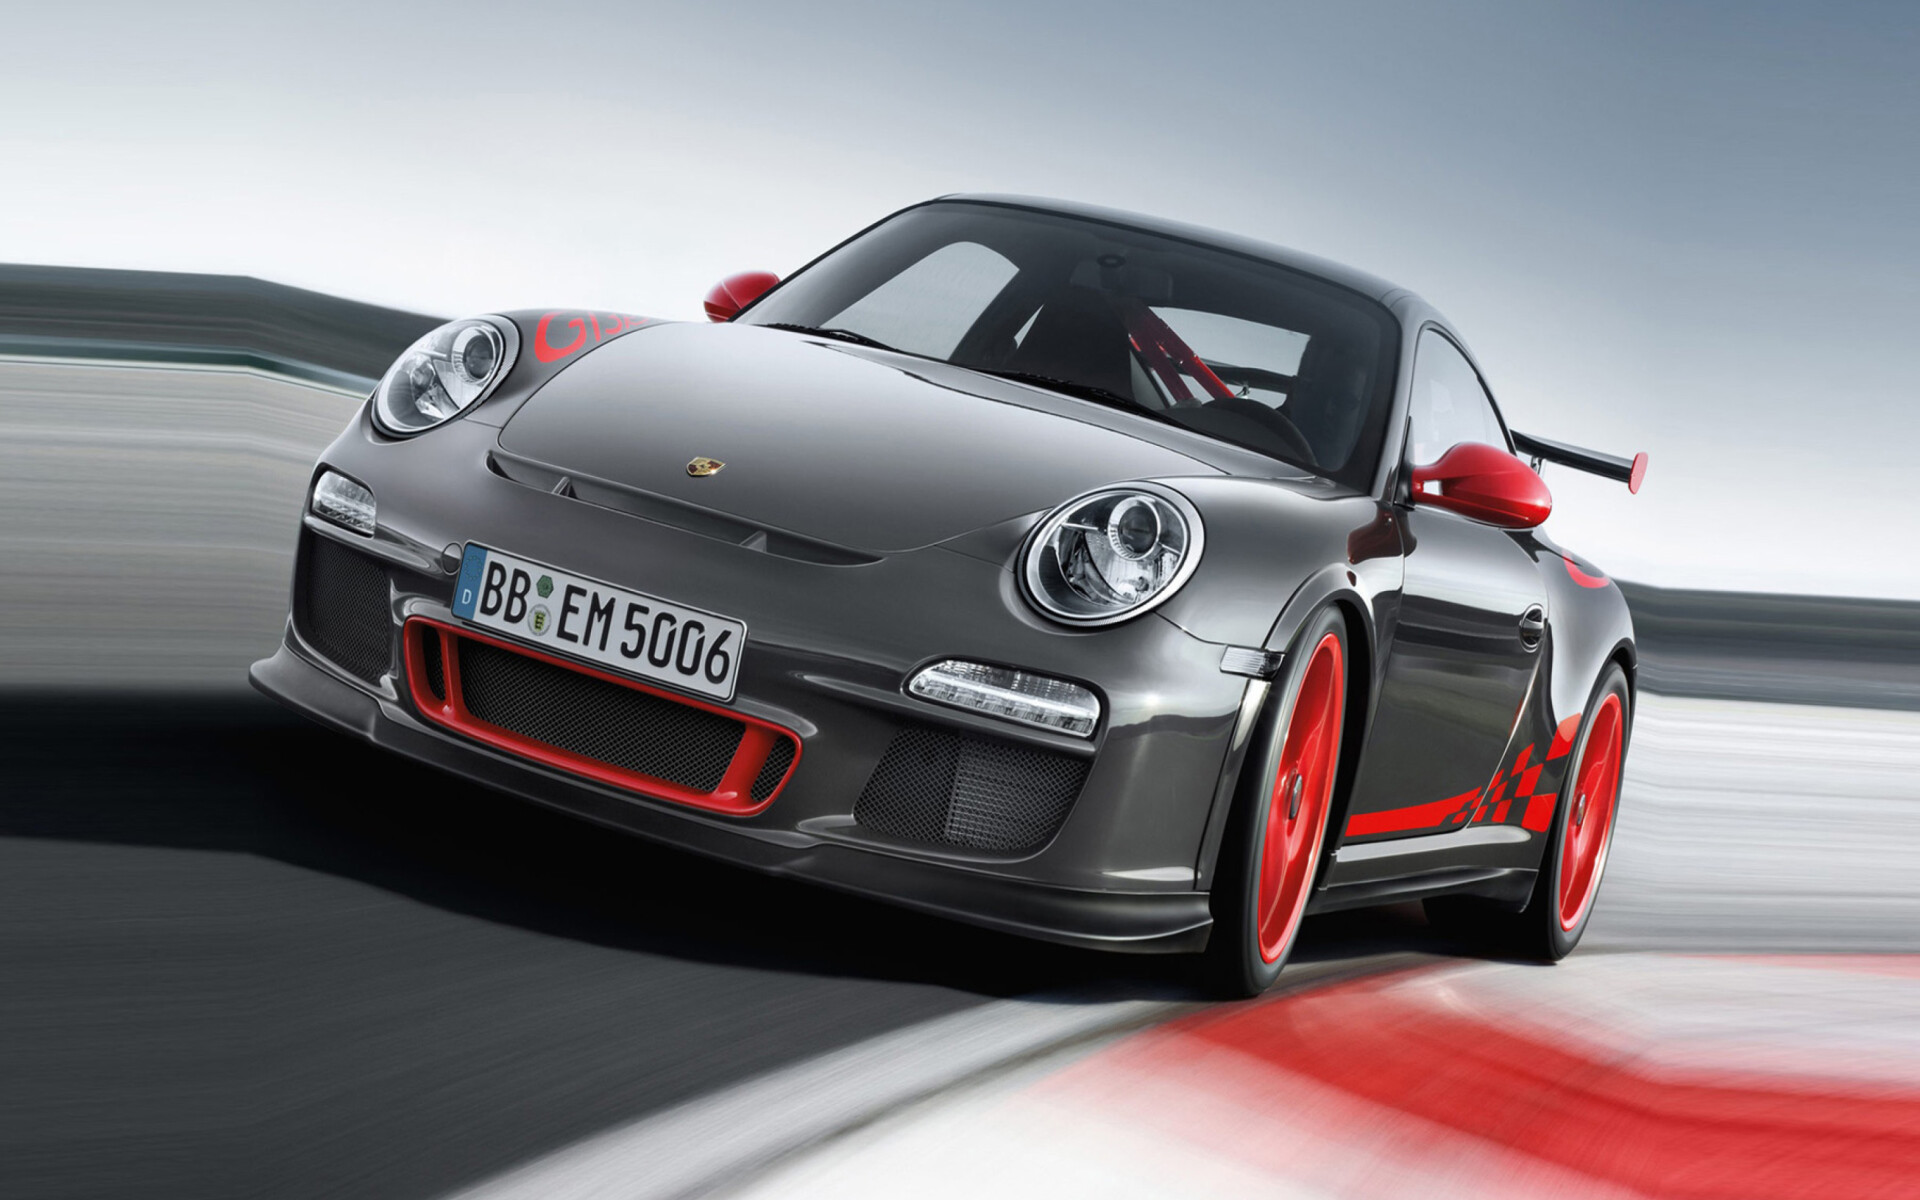 Porsche 911: GT3 RS, The Turbocharged version of the 997 series featured the same engine as the 996 Turbo. 1920x1200 HD Wallpaper.